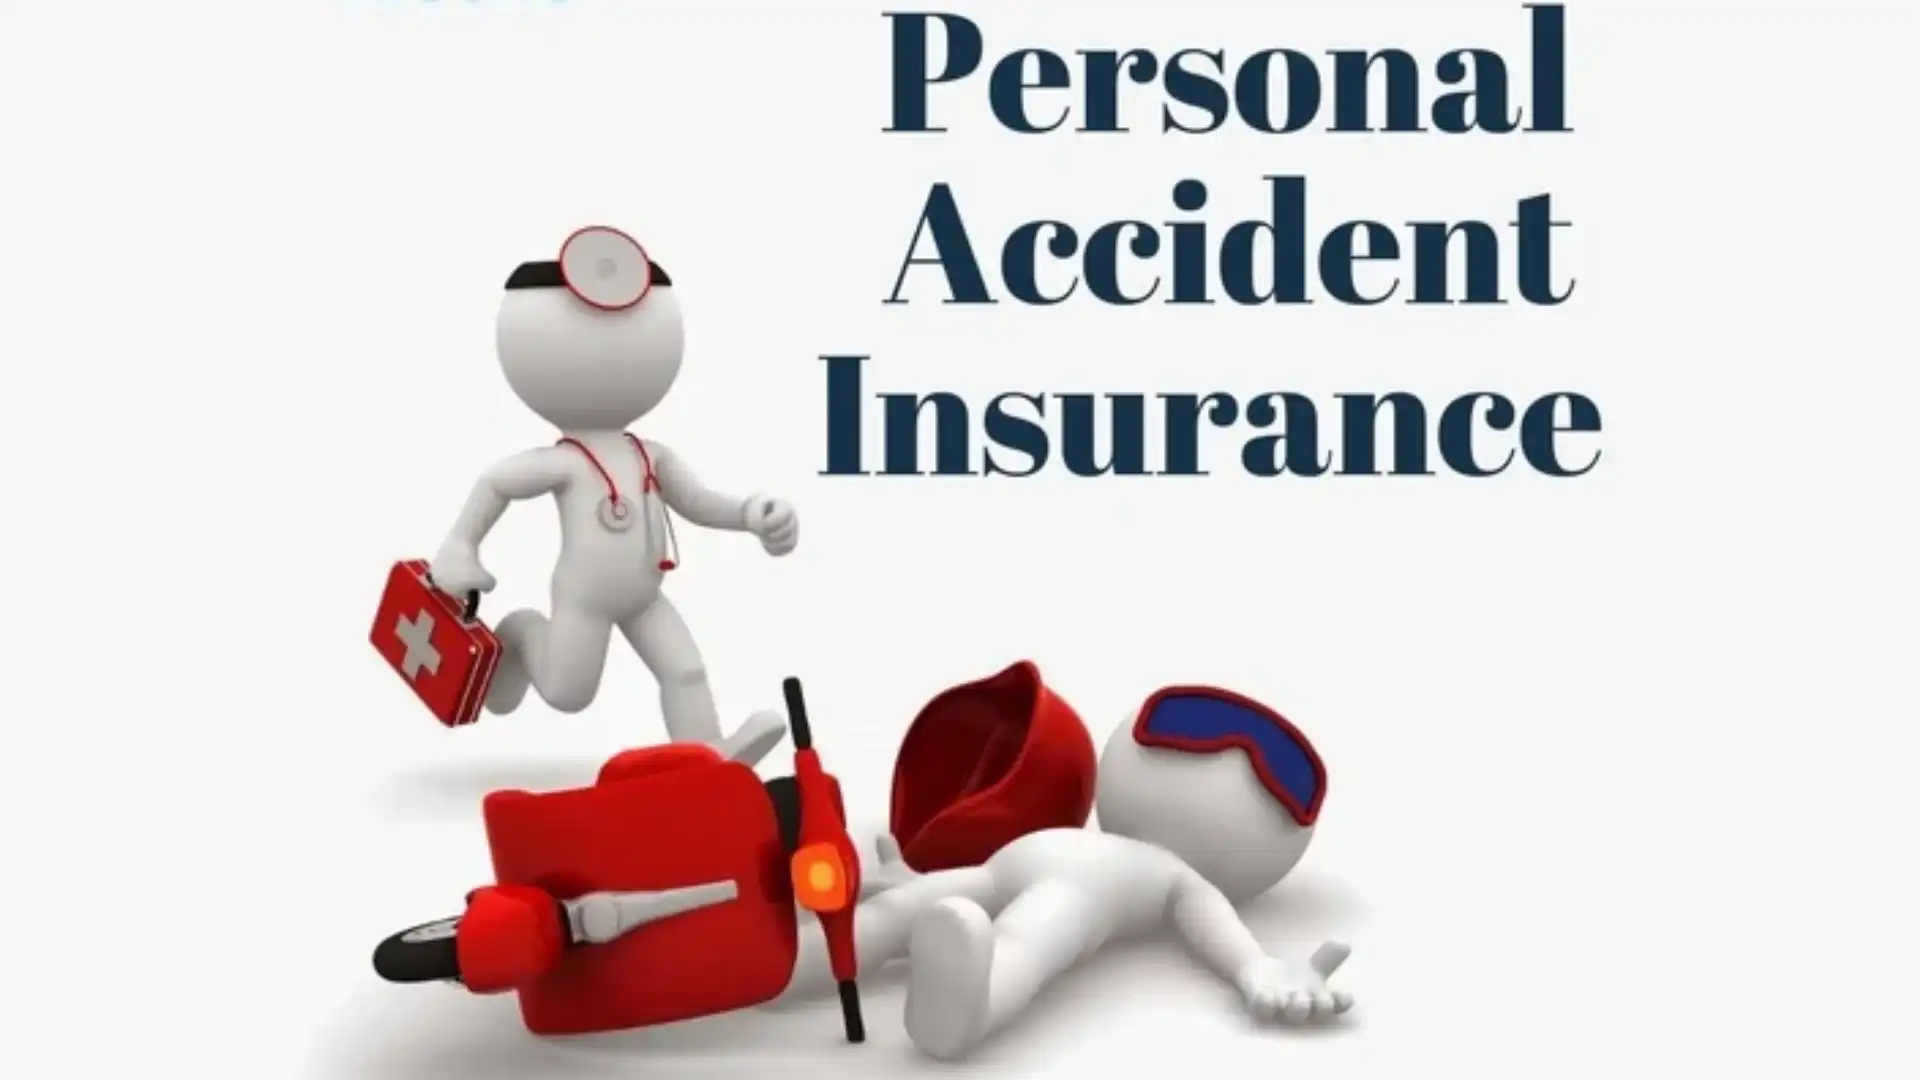 Personal Accident Insurance Policy Structure